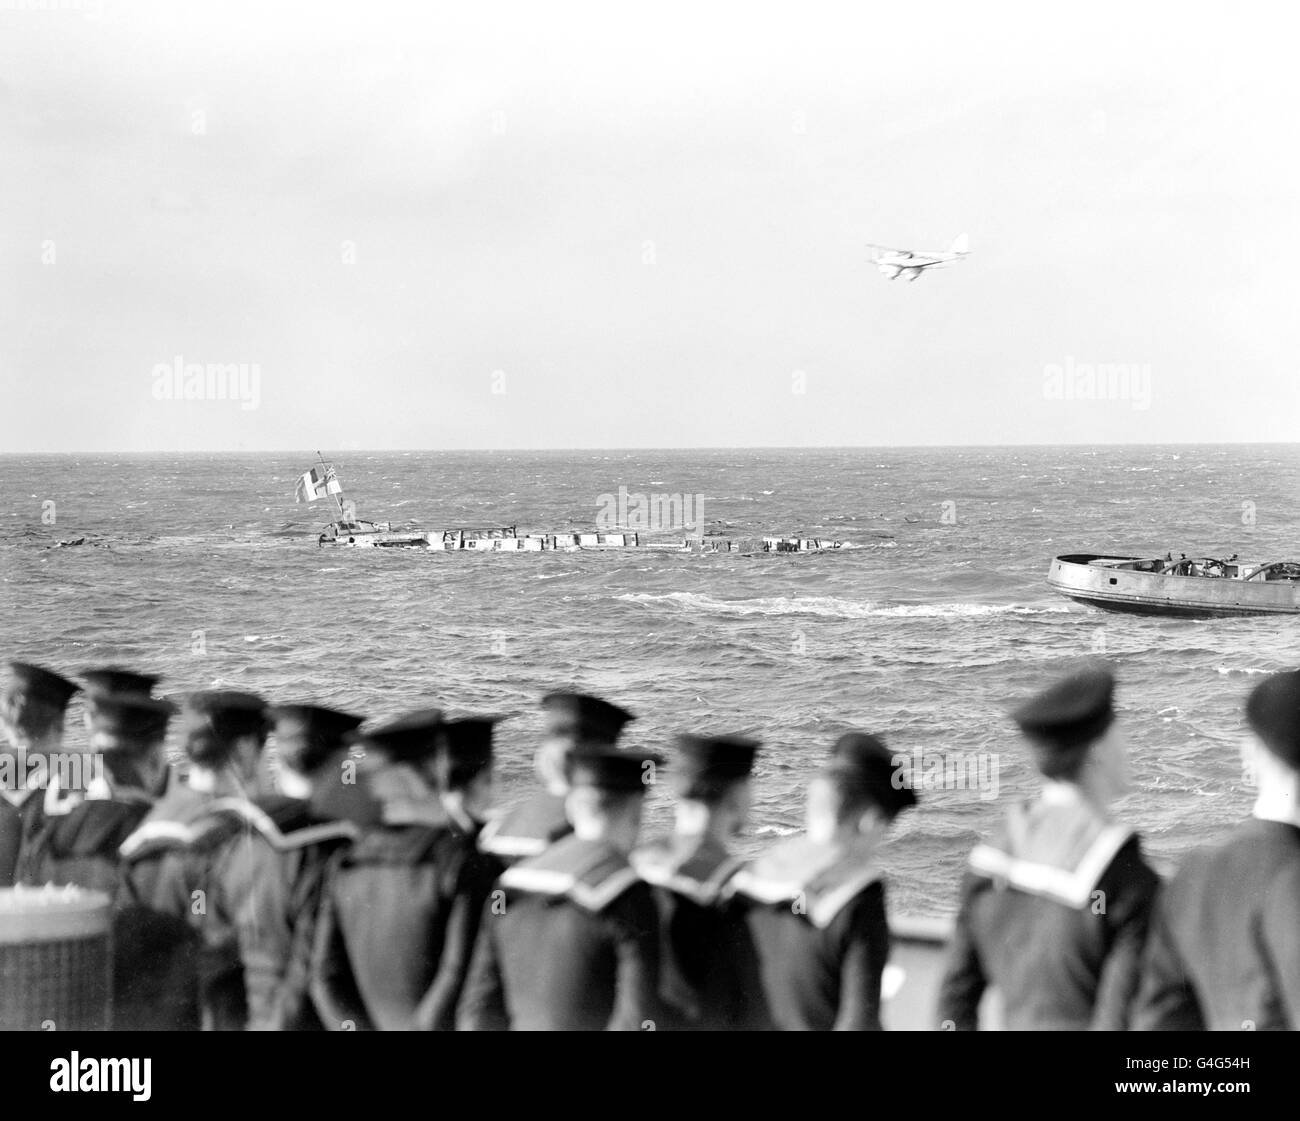 The 'Implacable' is sunk in the English Channel. The 156 year old man-of-war was seized by the British from the French Navy during the Battle of Trafalgar. The ship is to be sunk after wooden timbers of the craft had rotted beyond repair. Sailors lining the HMS Boxer look on as an aircraft flies over the scene Stock Photo